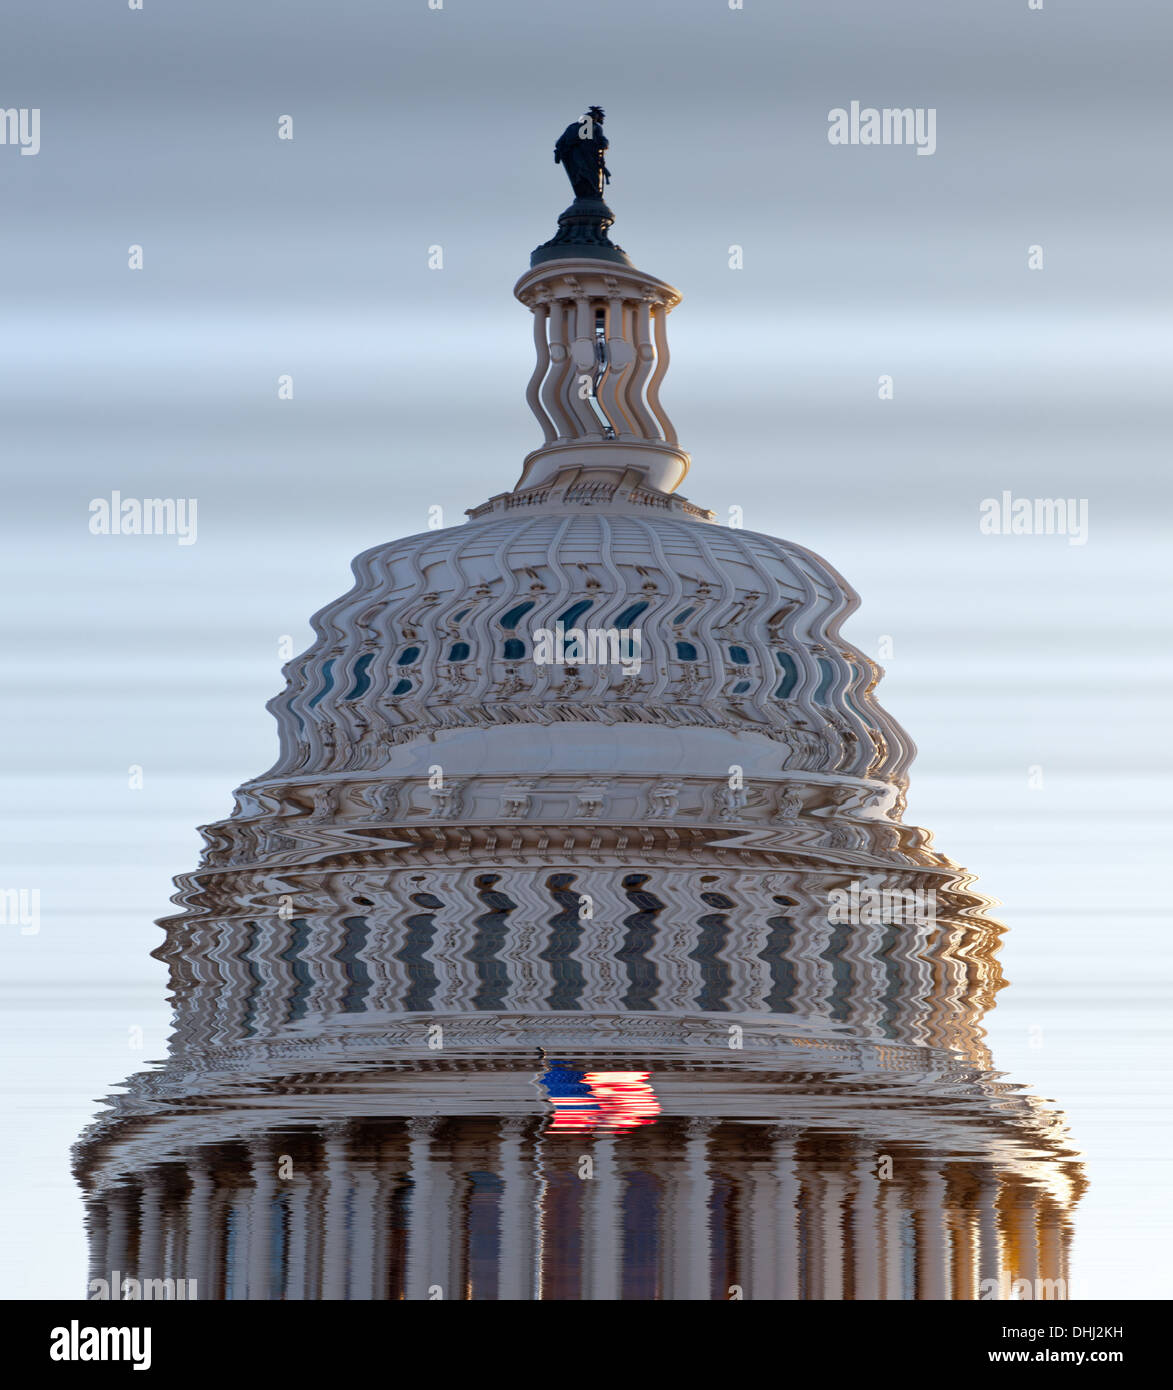 Dome of the Congress building on the US Capitol in Washington DC reflected in water Stock Photo